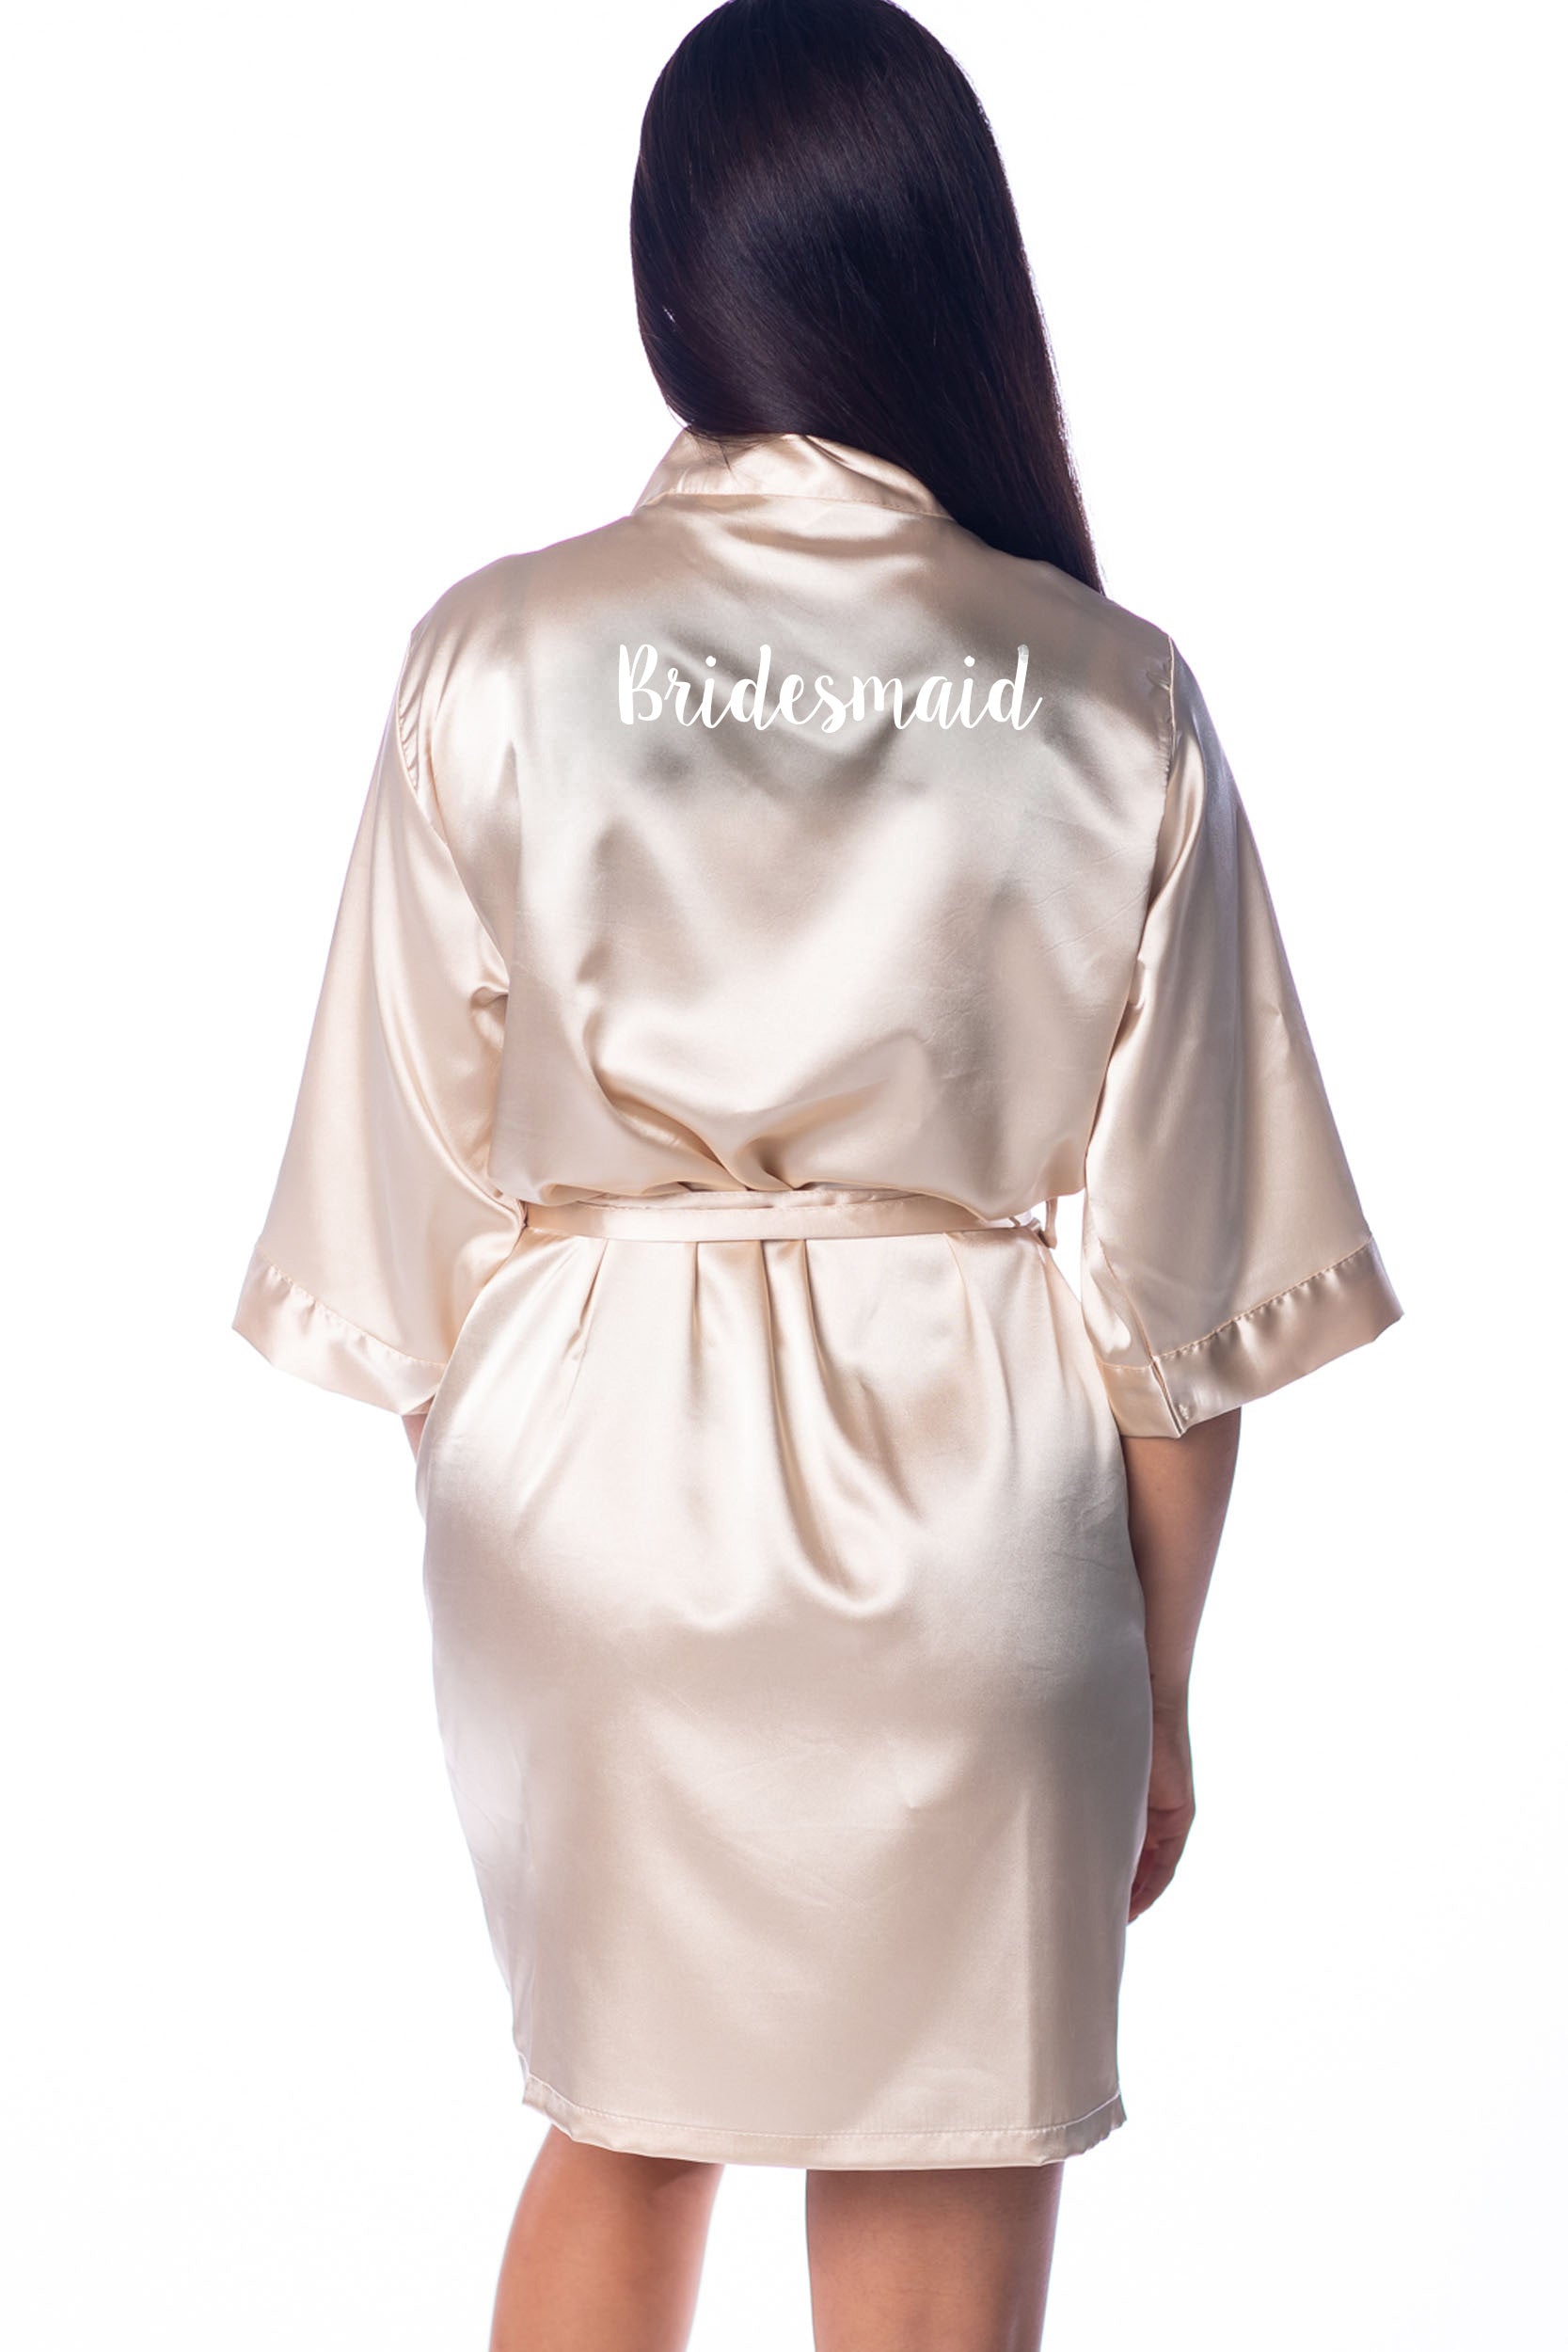 S/M "Bridesmaid" Champagne Satin Robe - Sweetpea in White (Clearance Item)